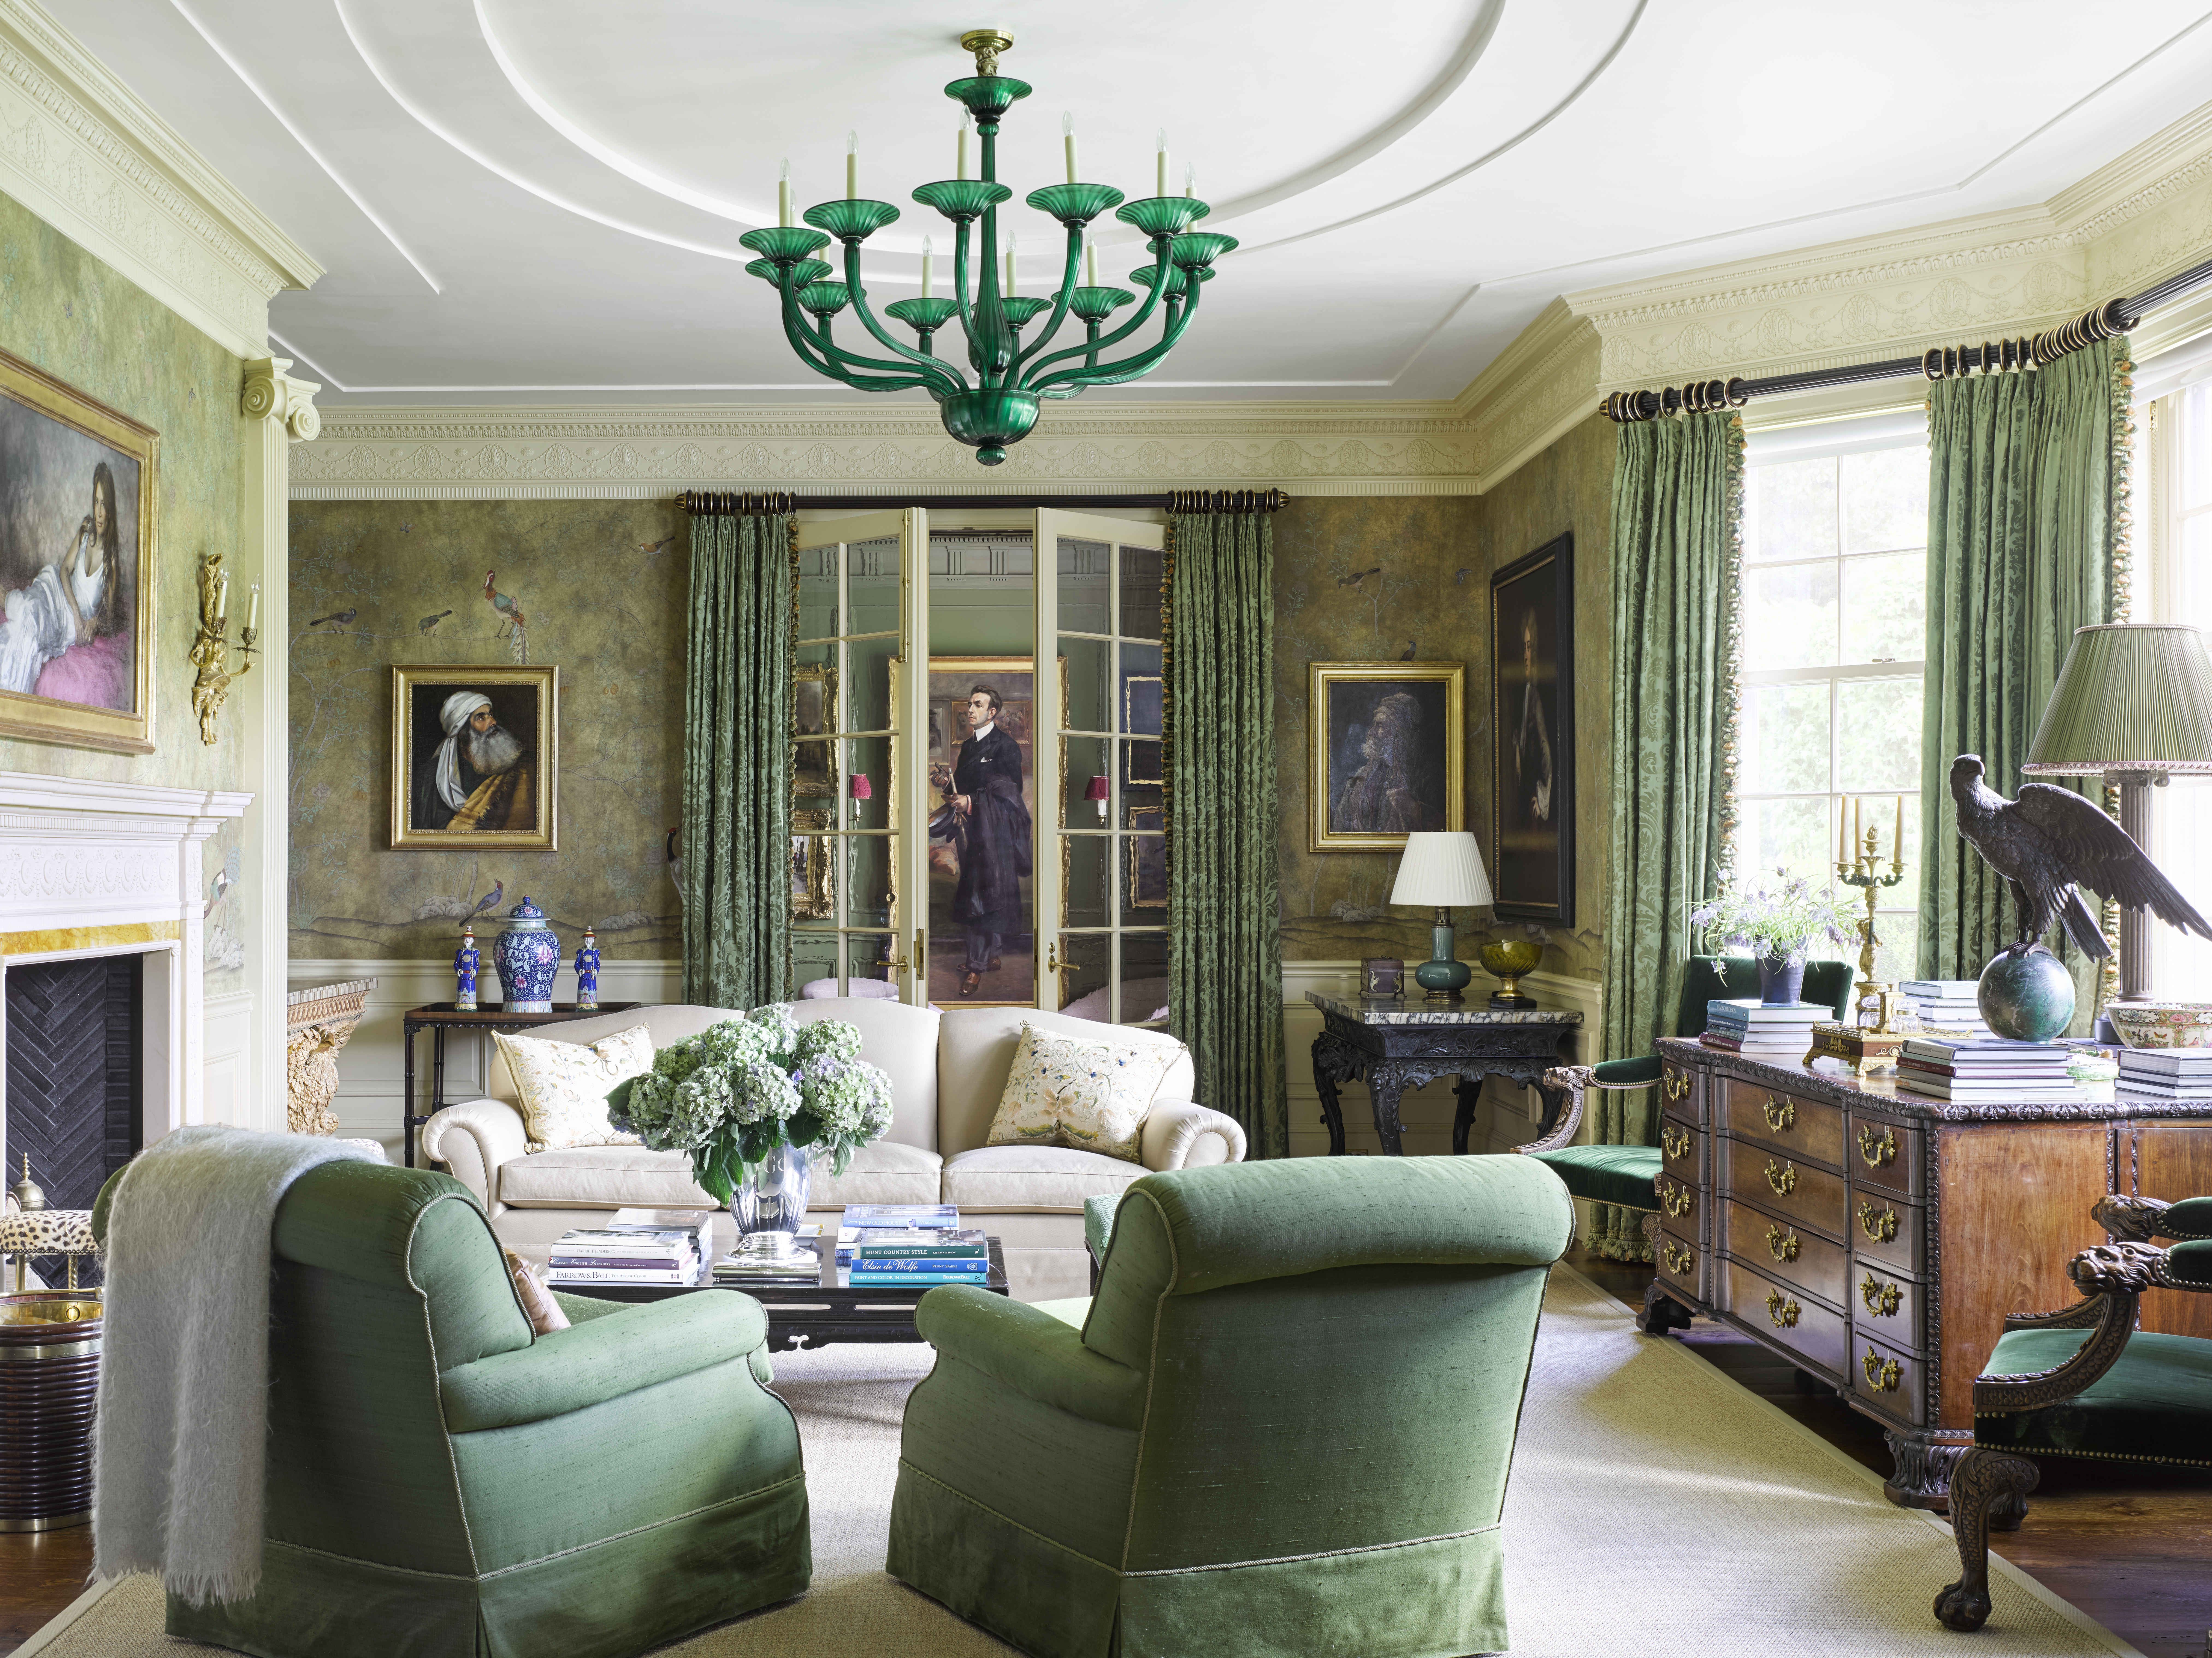 A Hudson Valley Home Tour Inside A Neoclassical New York Home